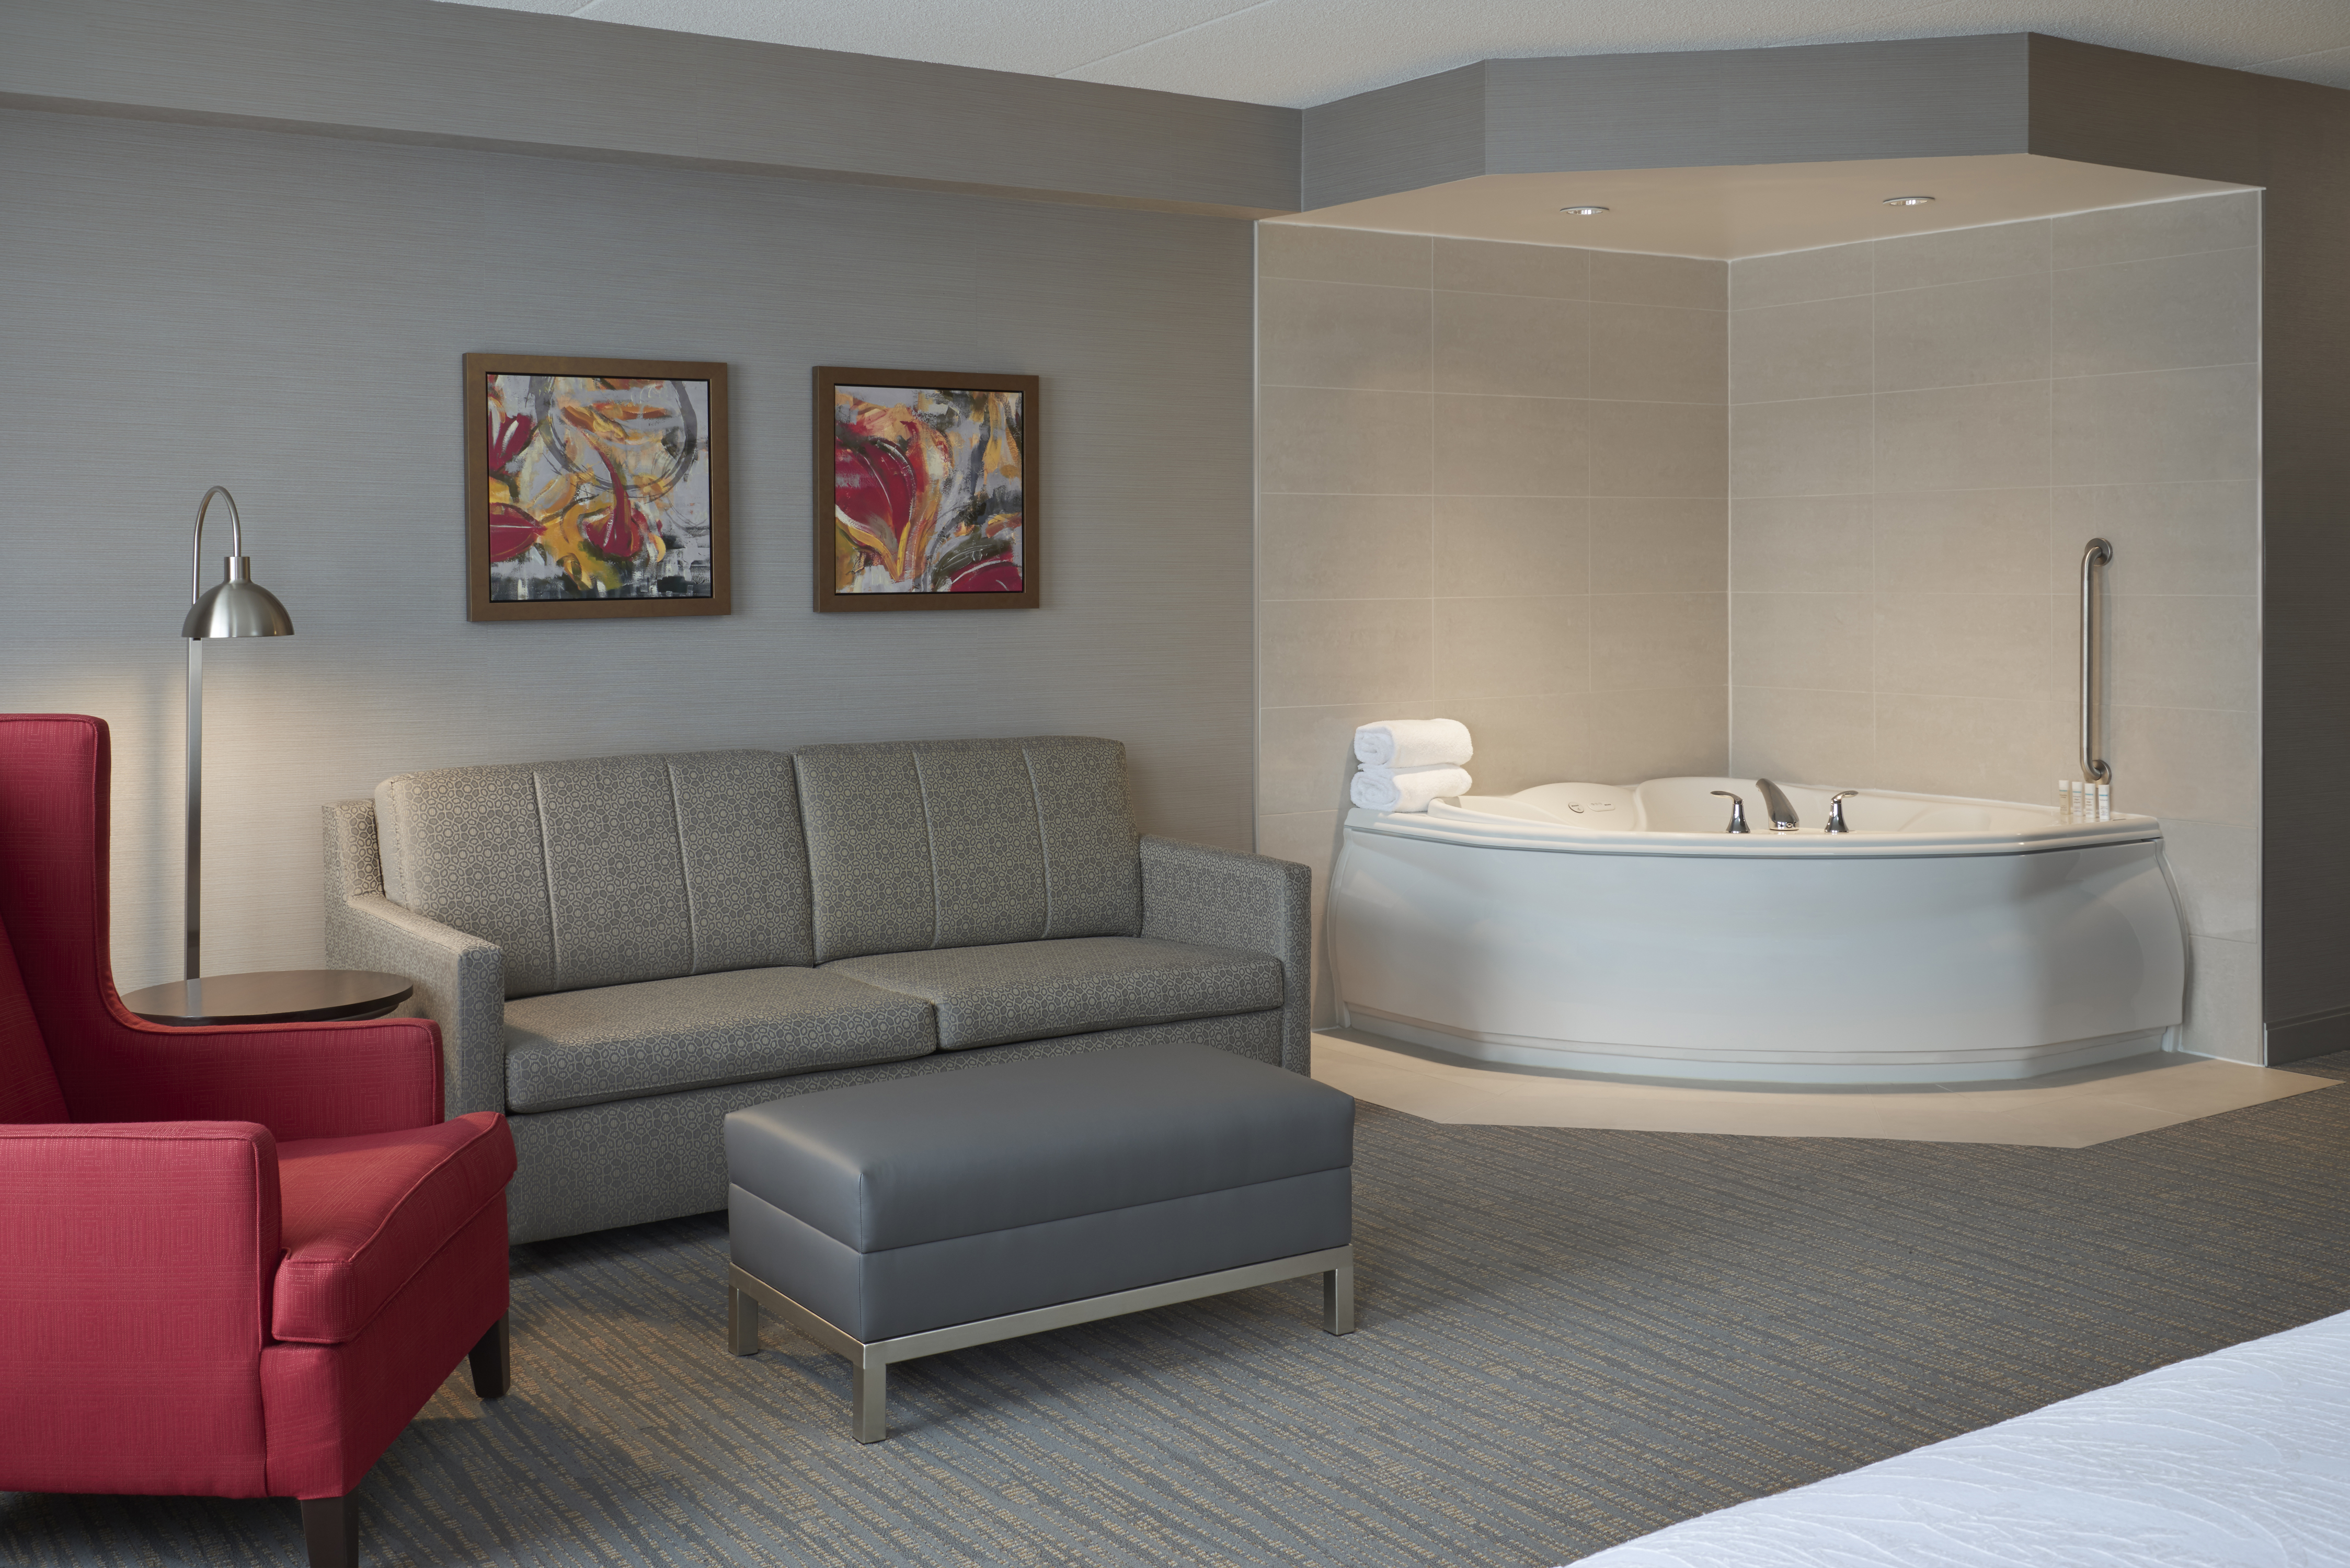 Guest Suite Lounge Area with Sofa, Armchair, Footrest and Whirlpool Tub